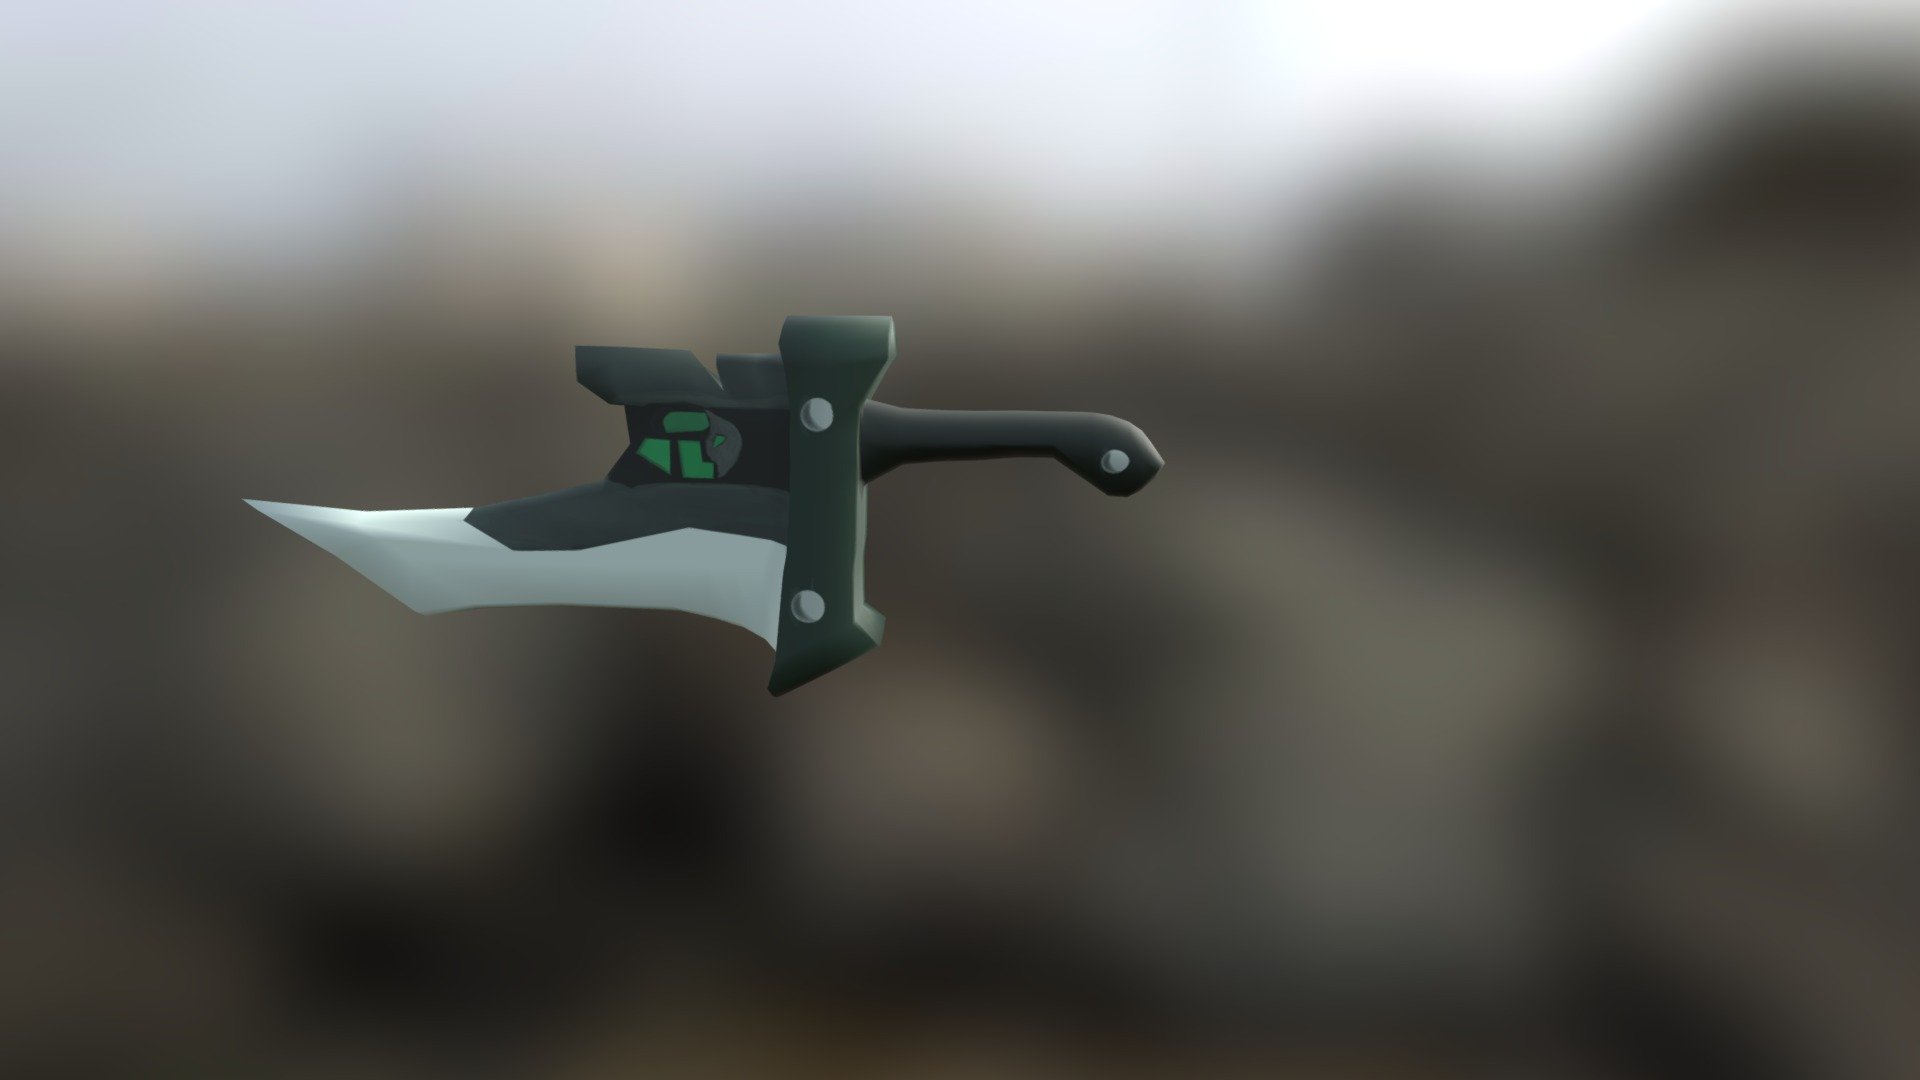 A low poly riven sword from League of Legends. Modelled in Autodesk Maya and painted in Adobe Photoshop 3d model